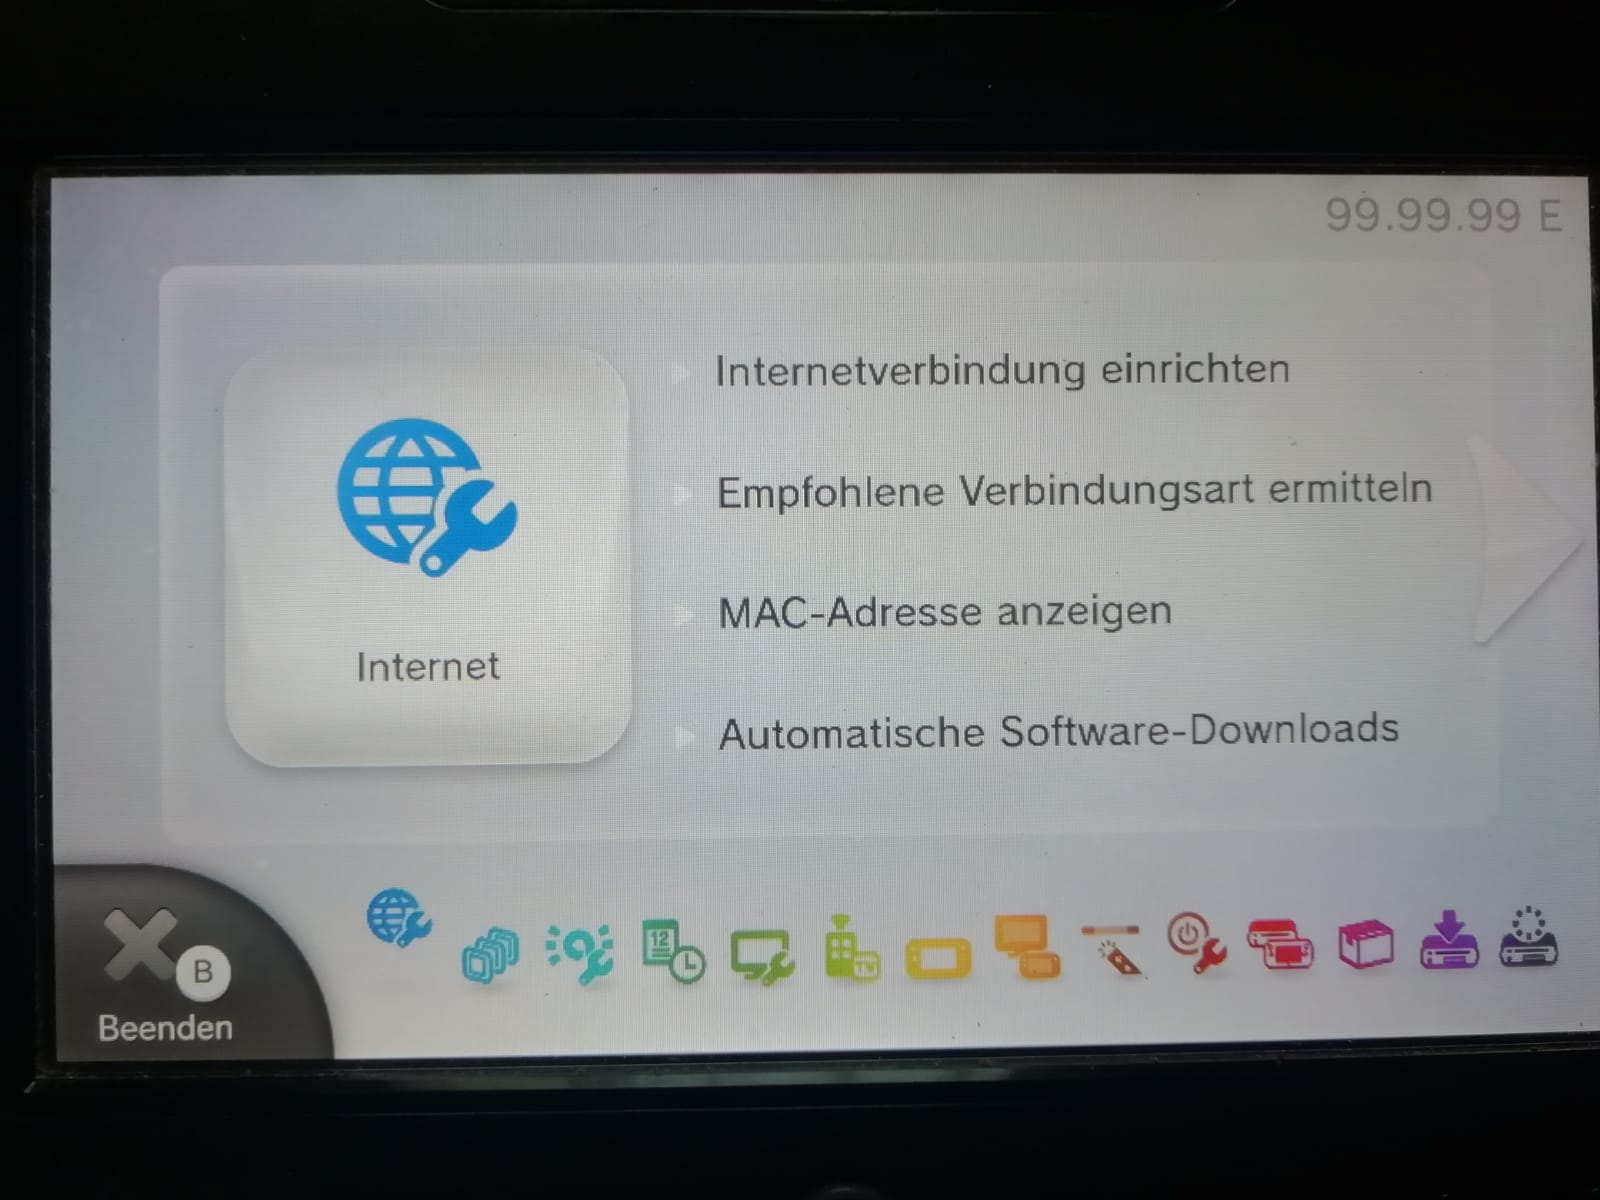 Just bought a Wiiu came with Haxchii 4.0, but... | Page 2 | GBAtemp.net -  The Independent Video Game Community